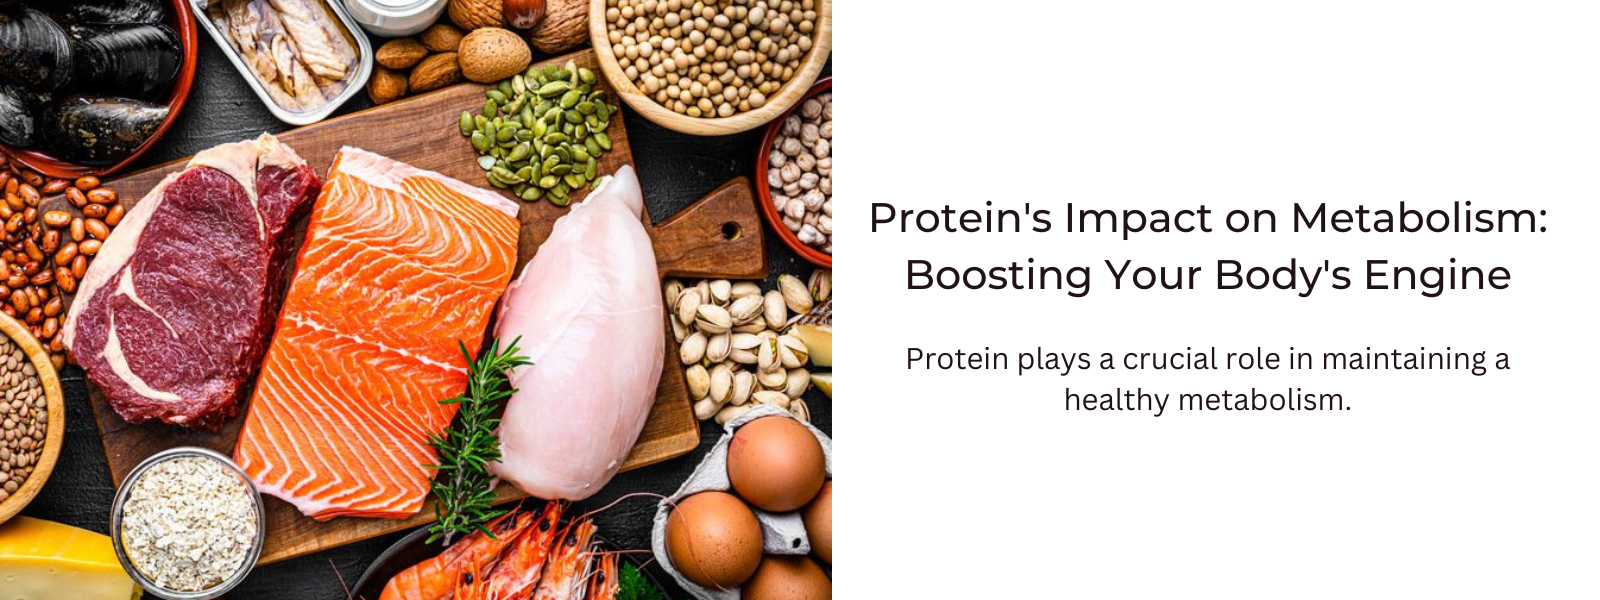 Protein's Impact on Metabolism: Boosting Your Body's Engine